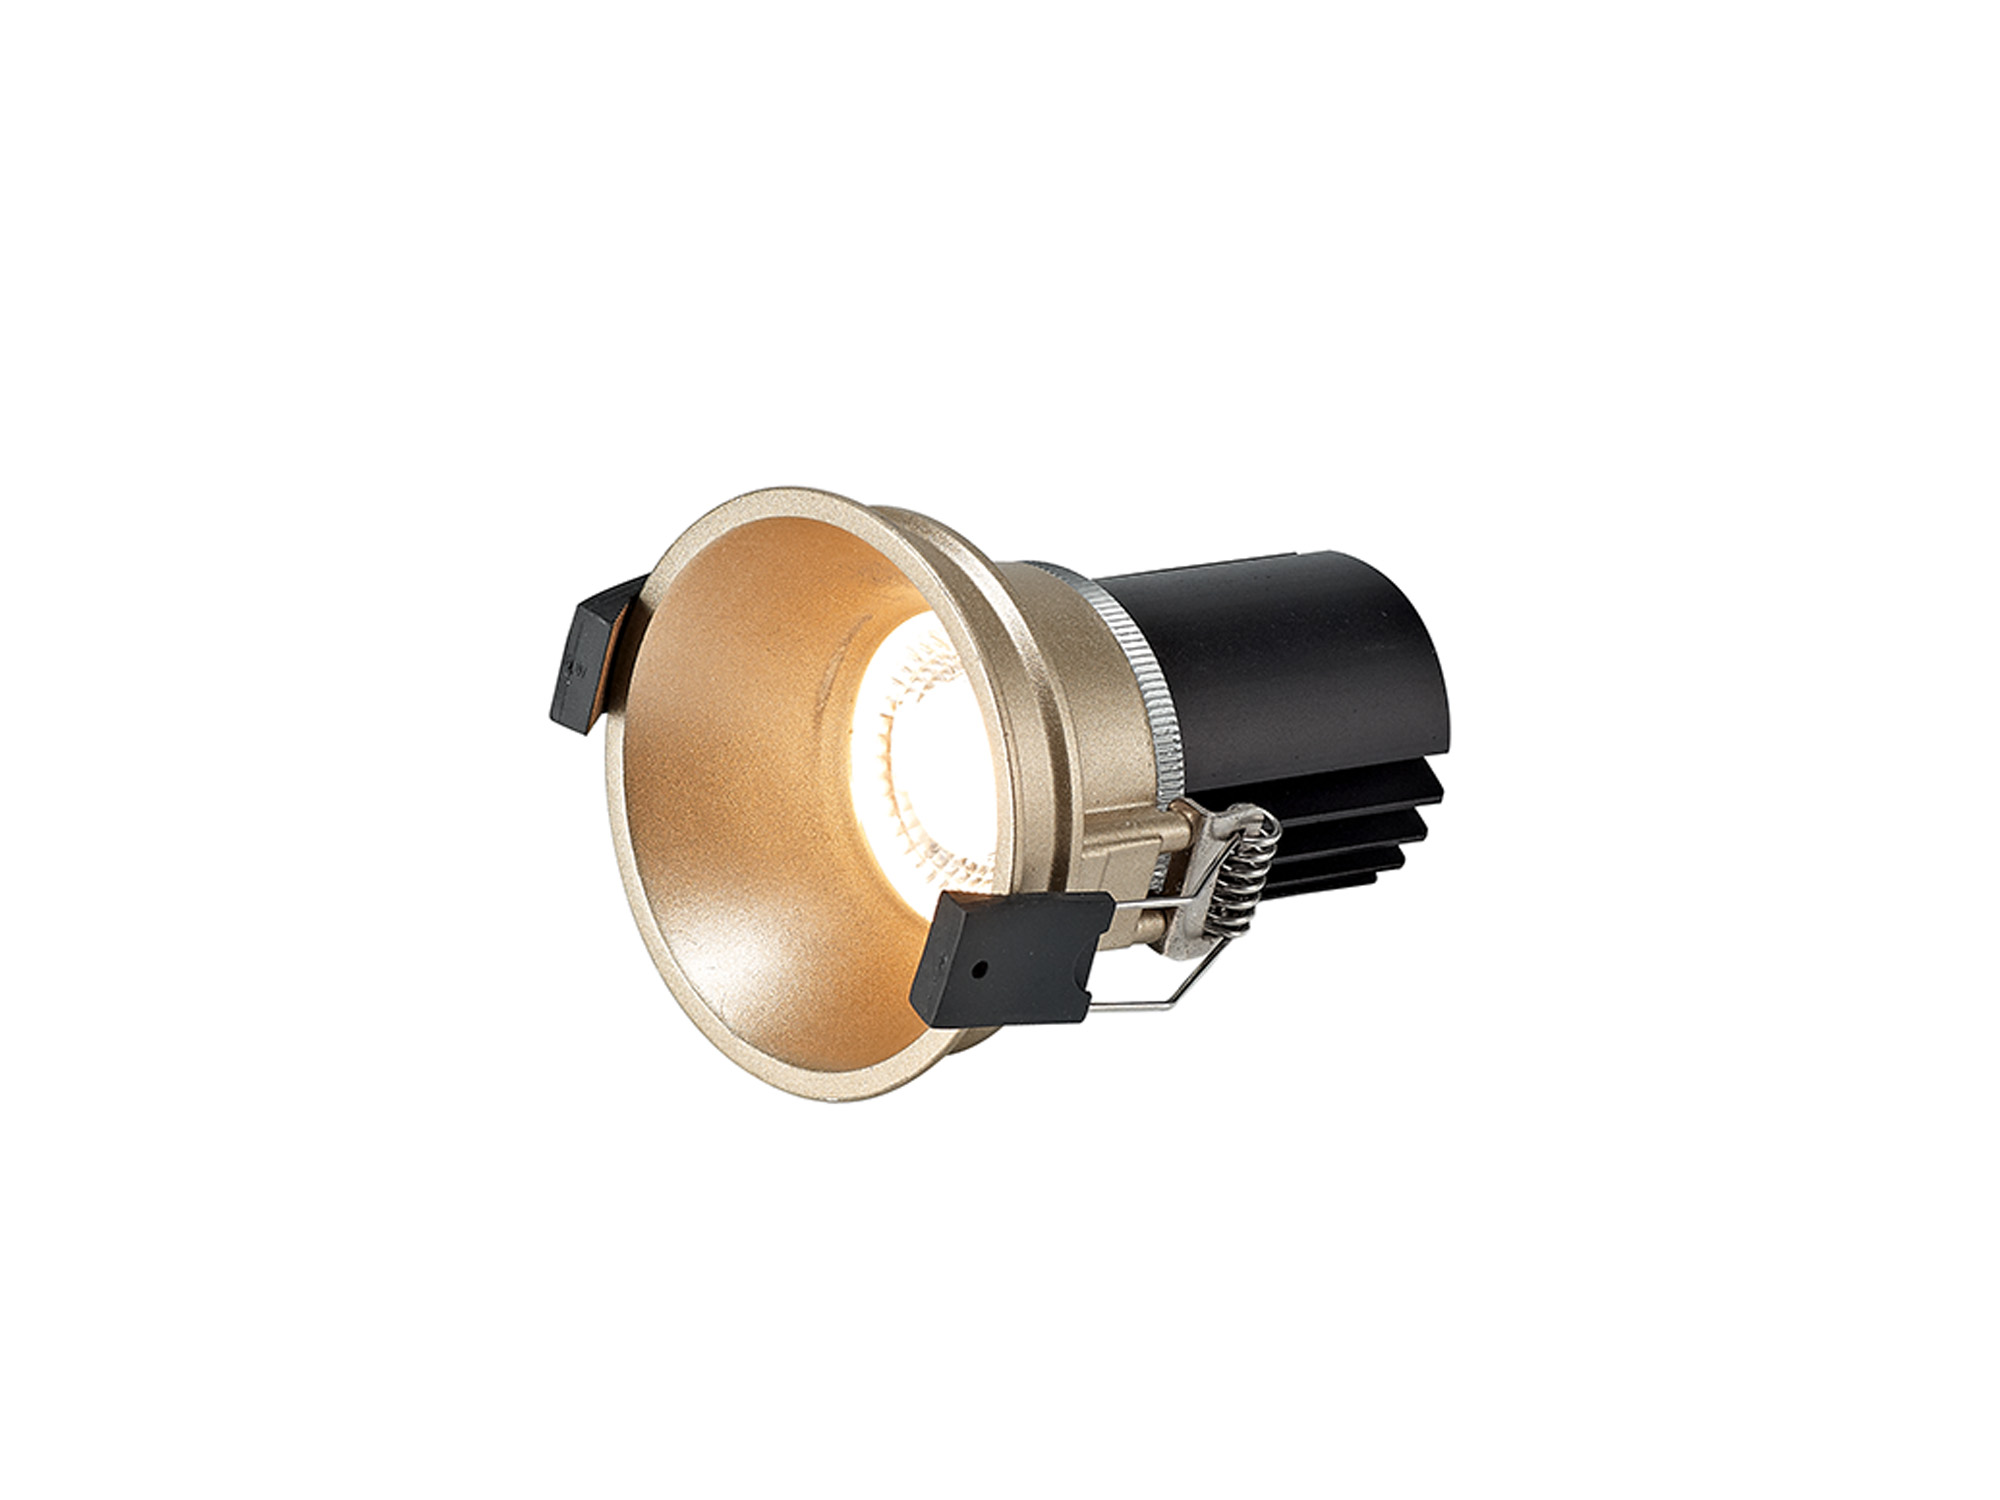 DM201711  Bania 12 Powered by Tridonic  12W 2700K 1200lm 12° CRI>90 LED Engine; 350mA Gold Fixed Recessed Spotlight; IP20